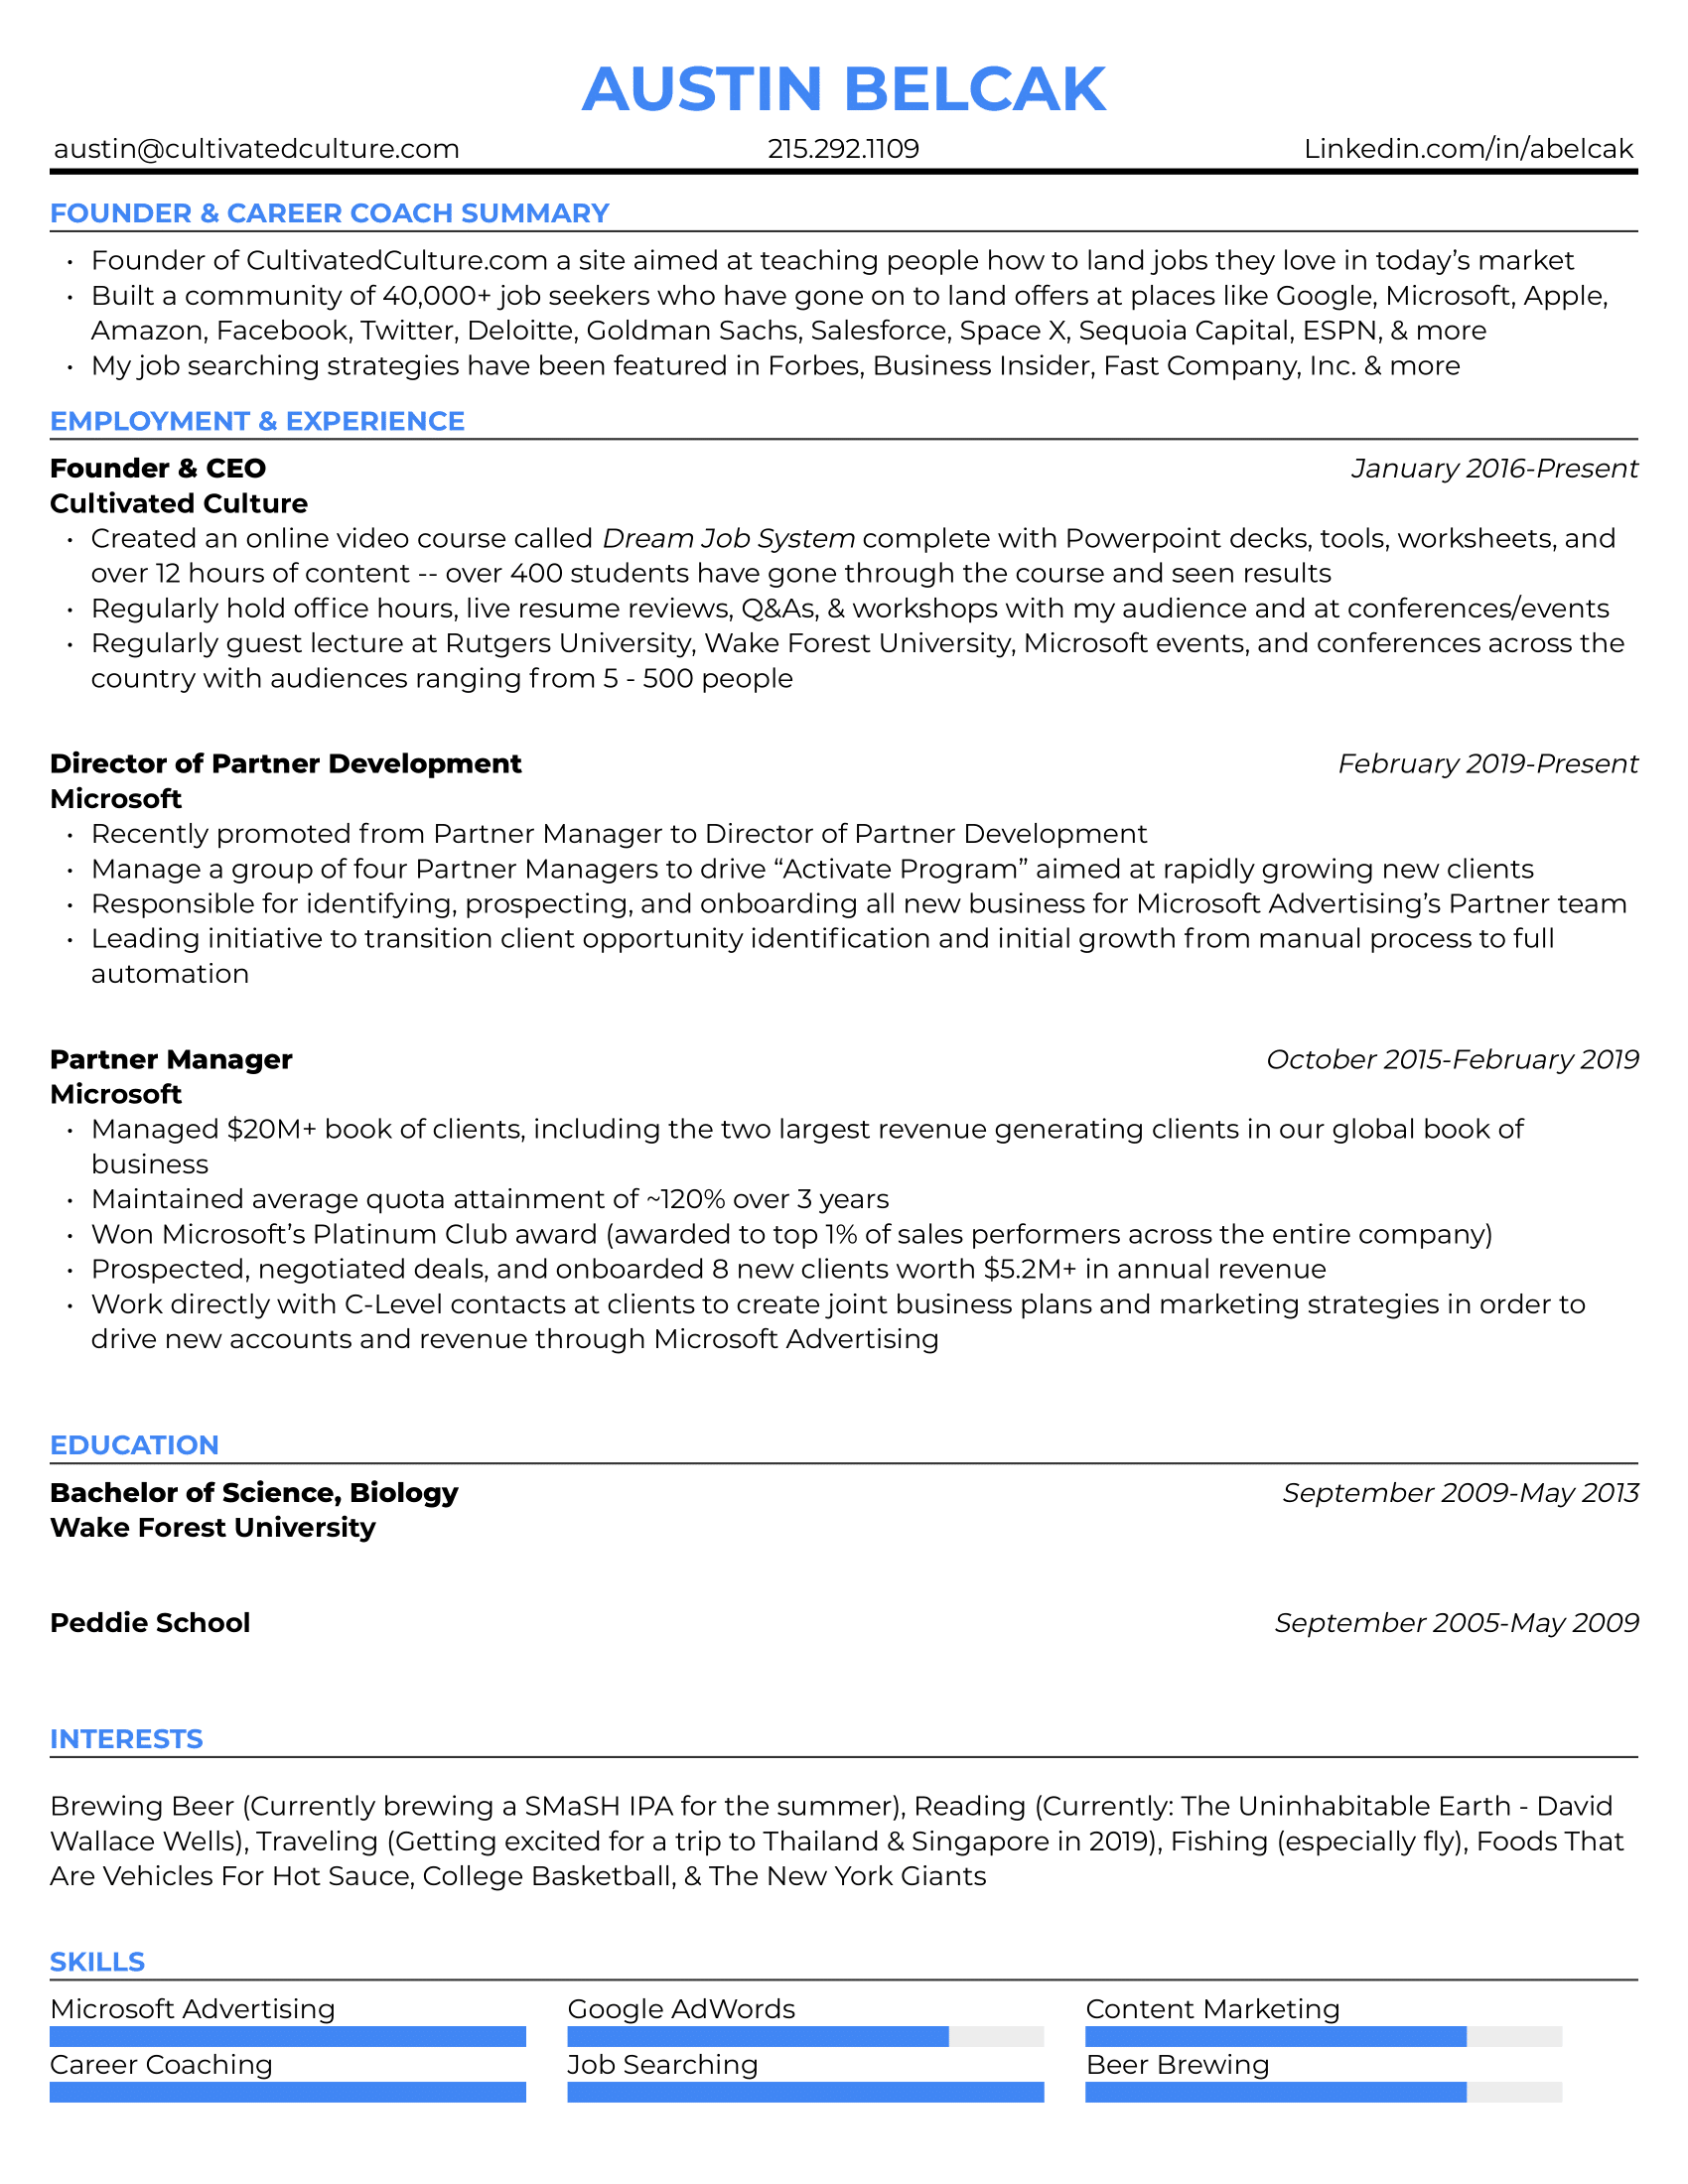 Example of Austin's resume with different font colors